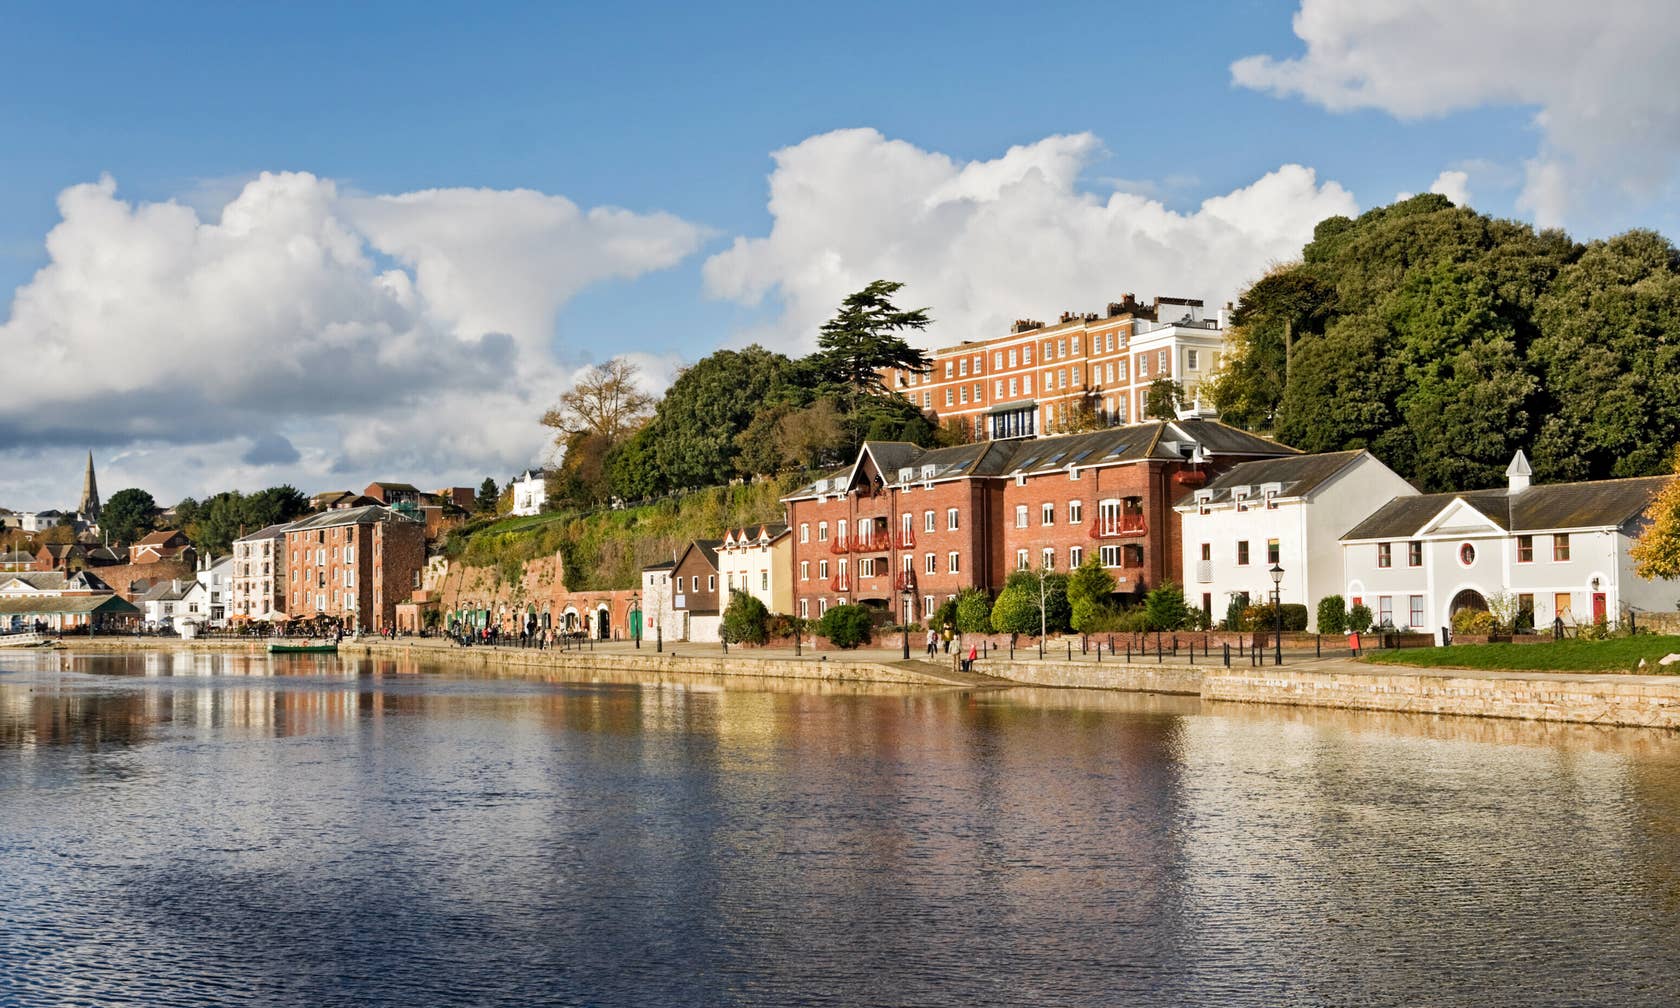 Holiday rental houses in Exeter